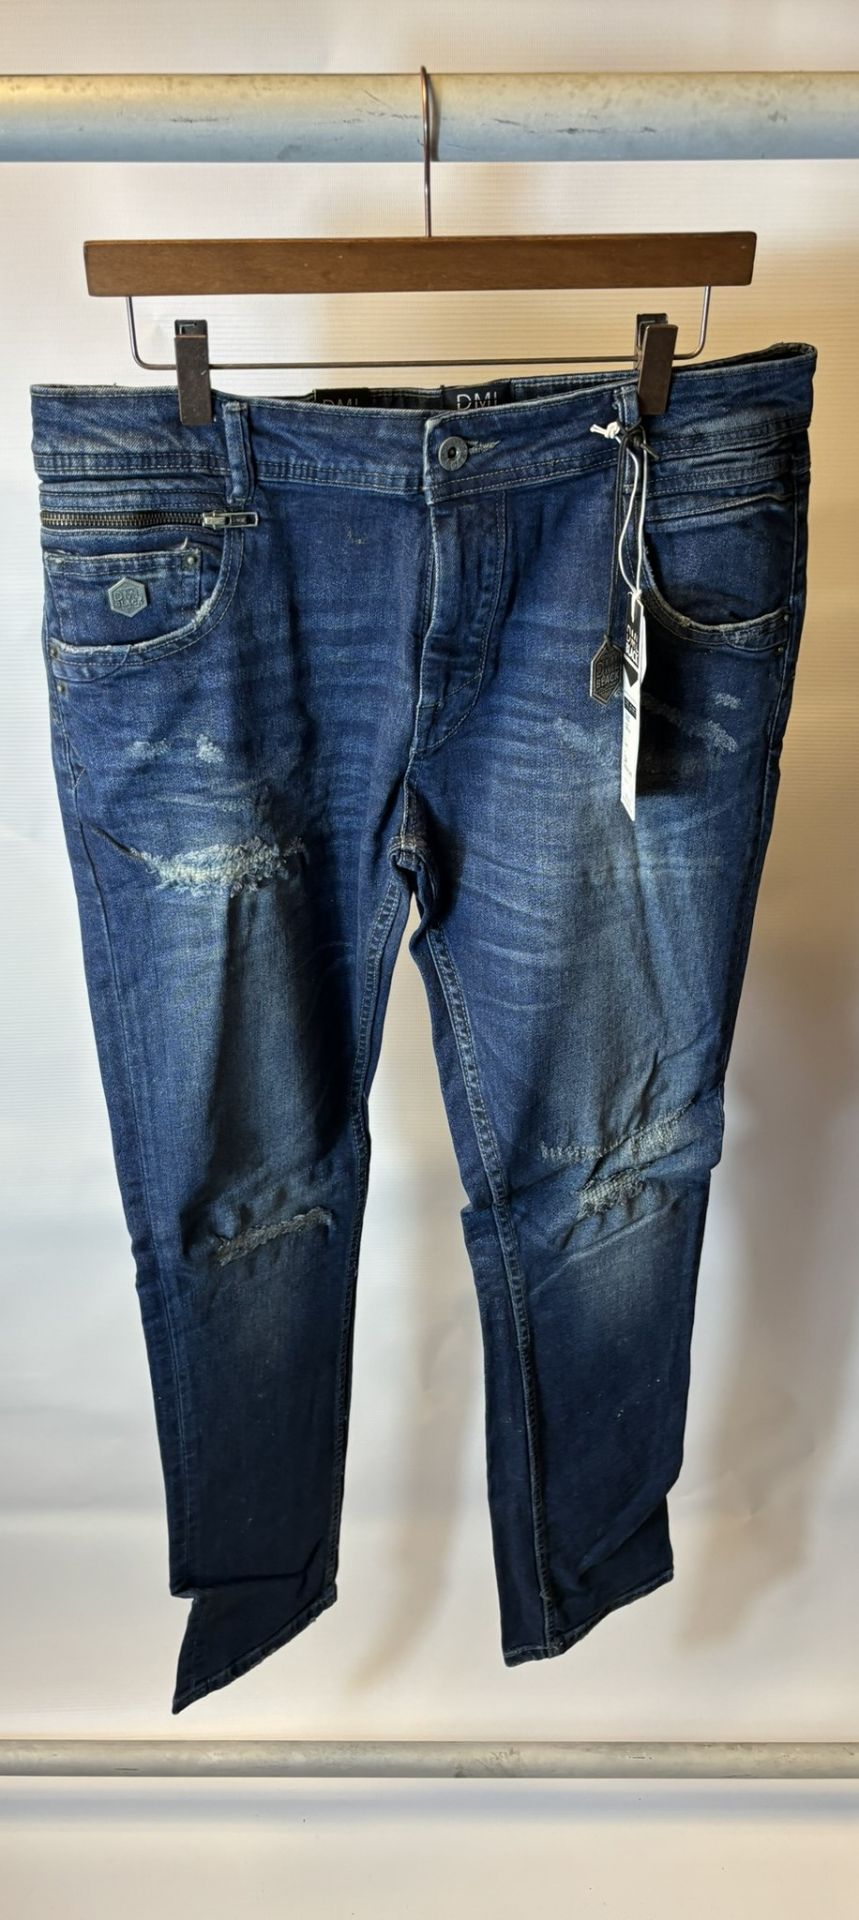 13 x Pairs Of various Sized DML Jeans Prophecy & Voyage Blue Jeans - Image 16 of 39